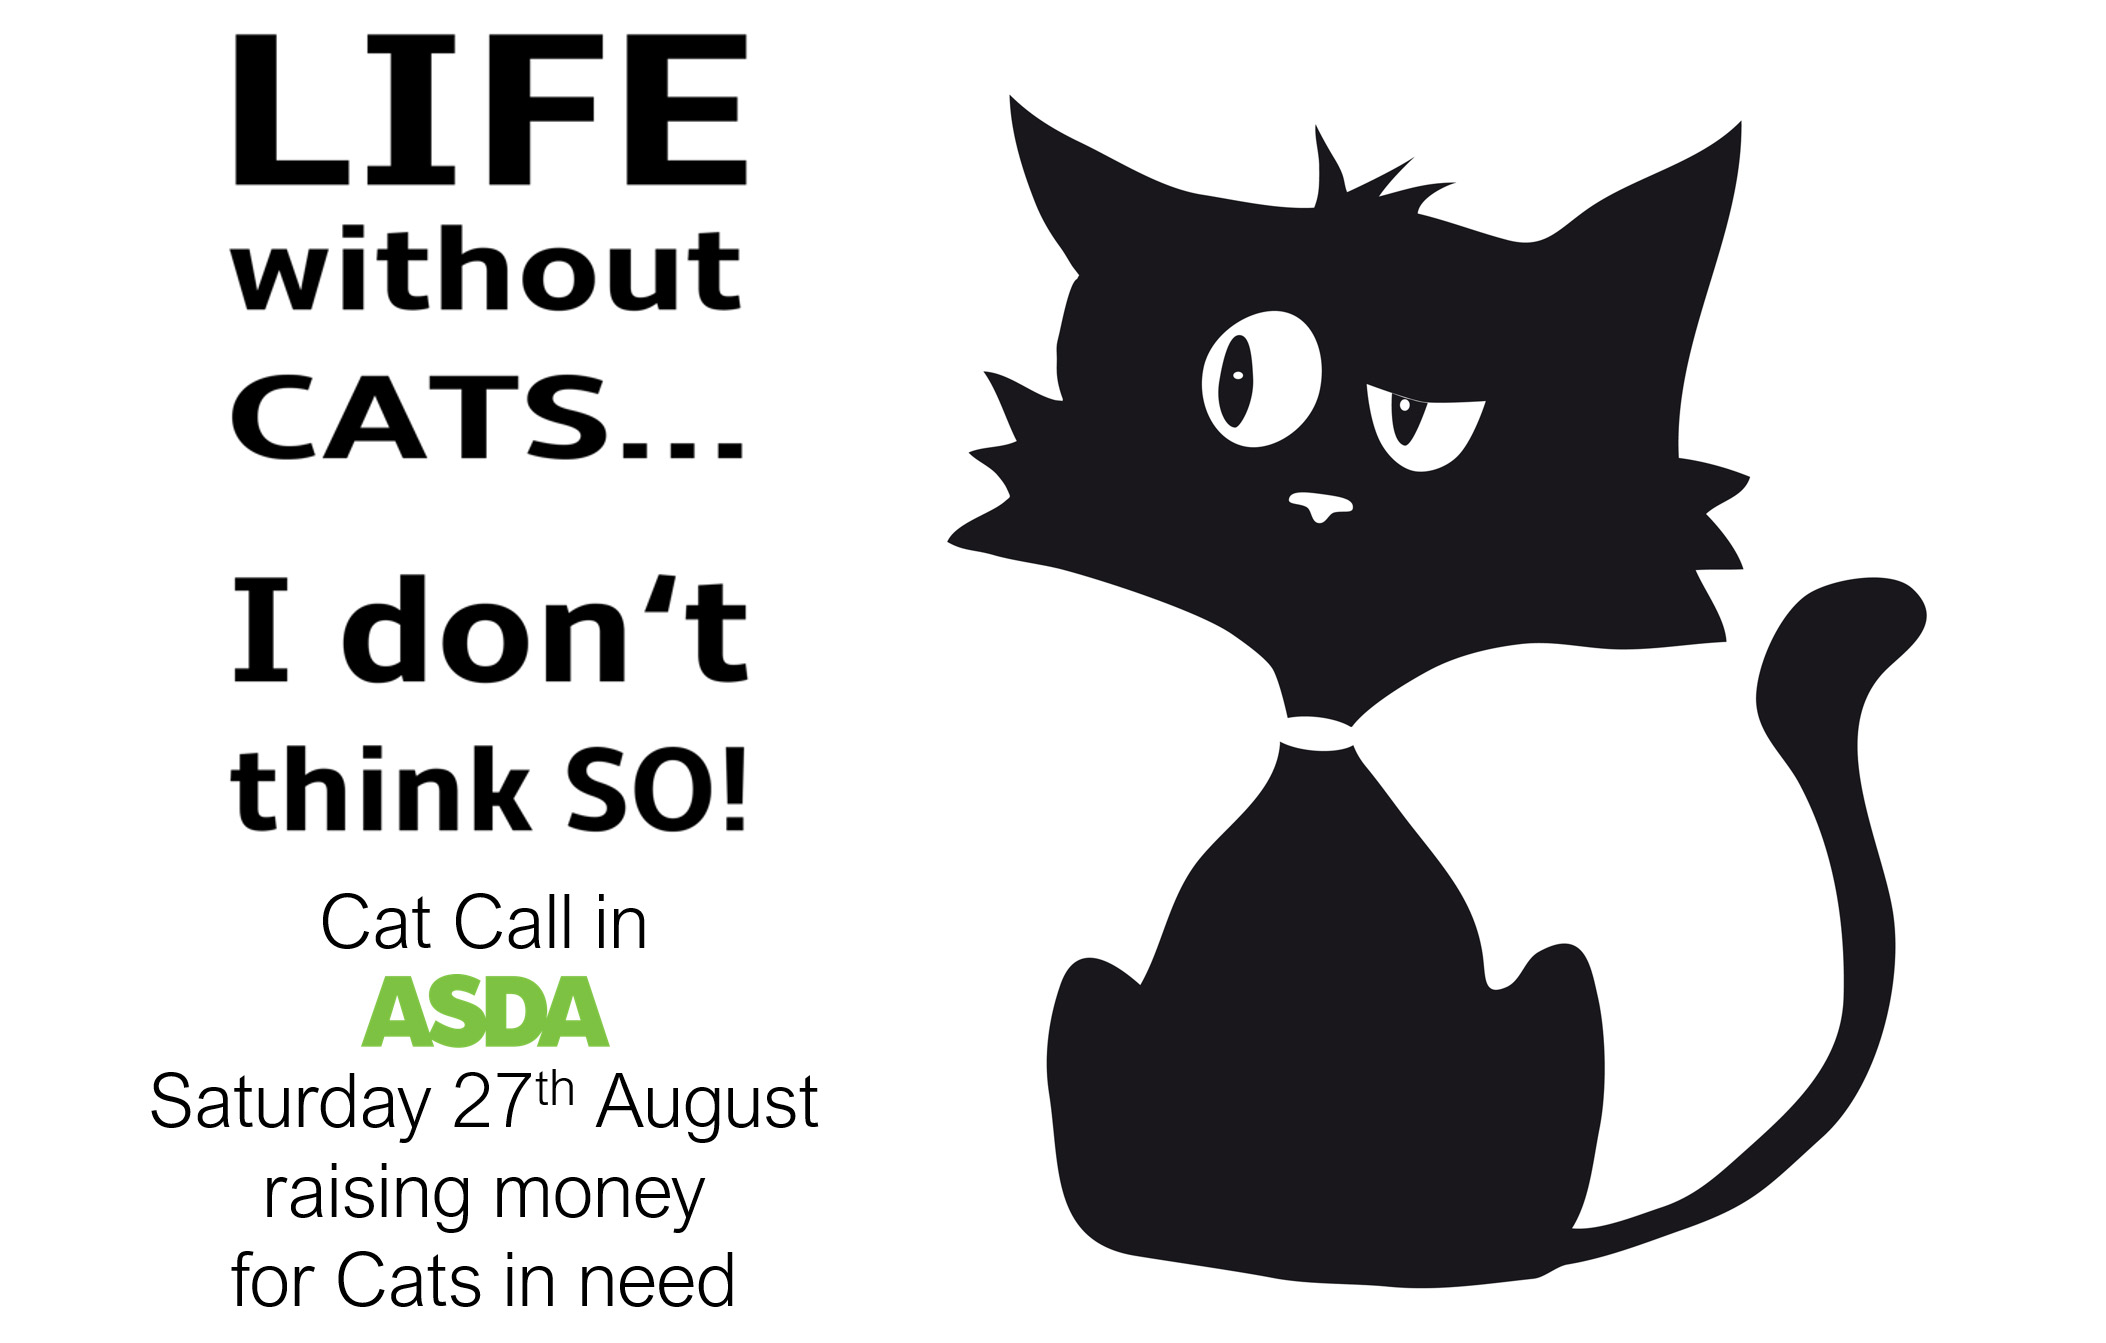 Cat Call charity in Asda Saturday 27th August